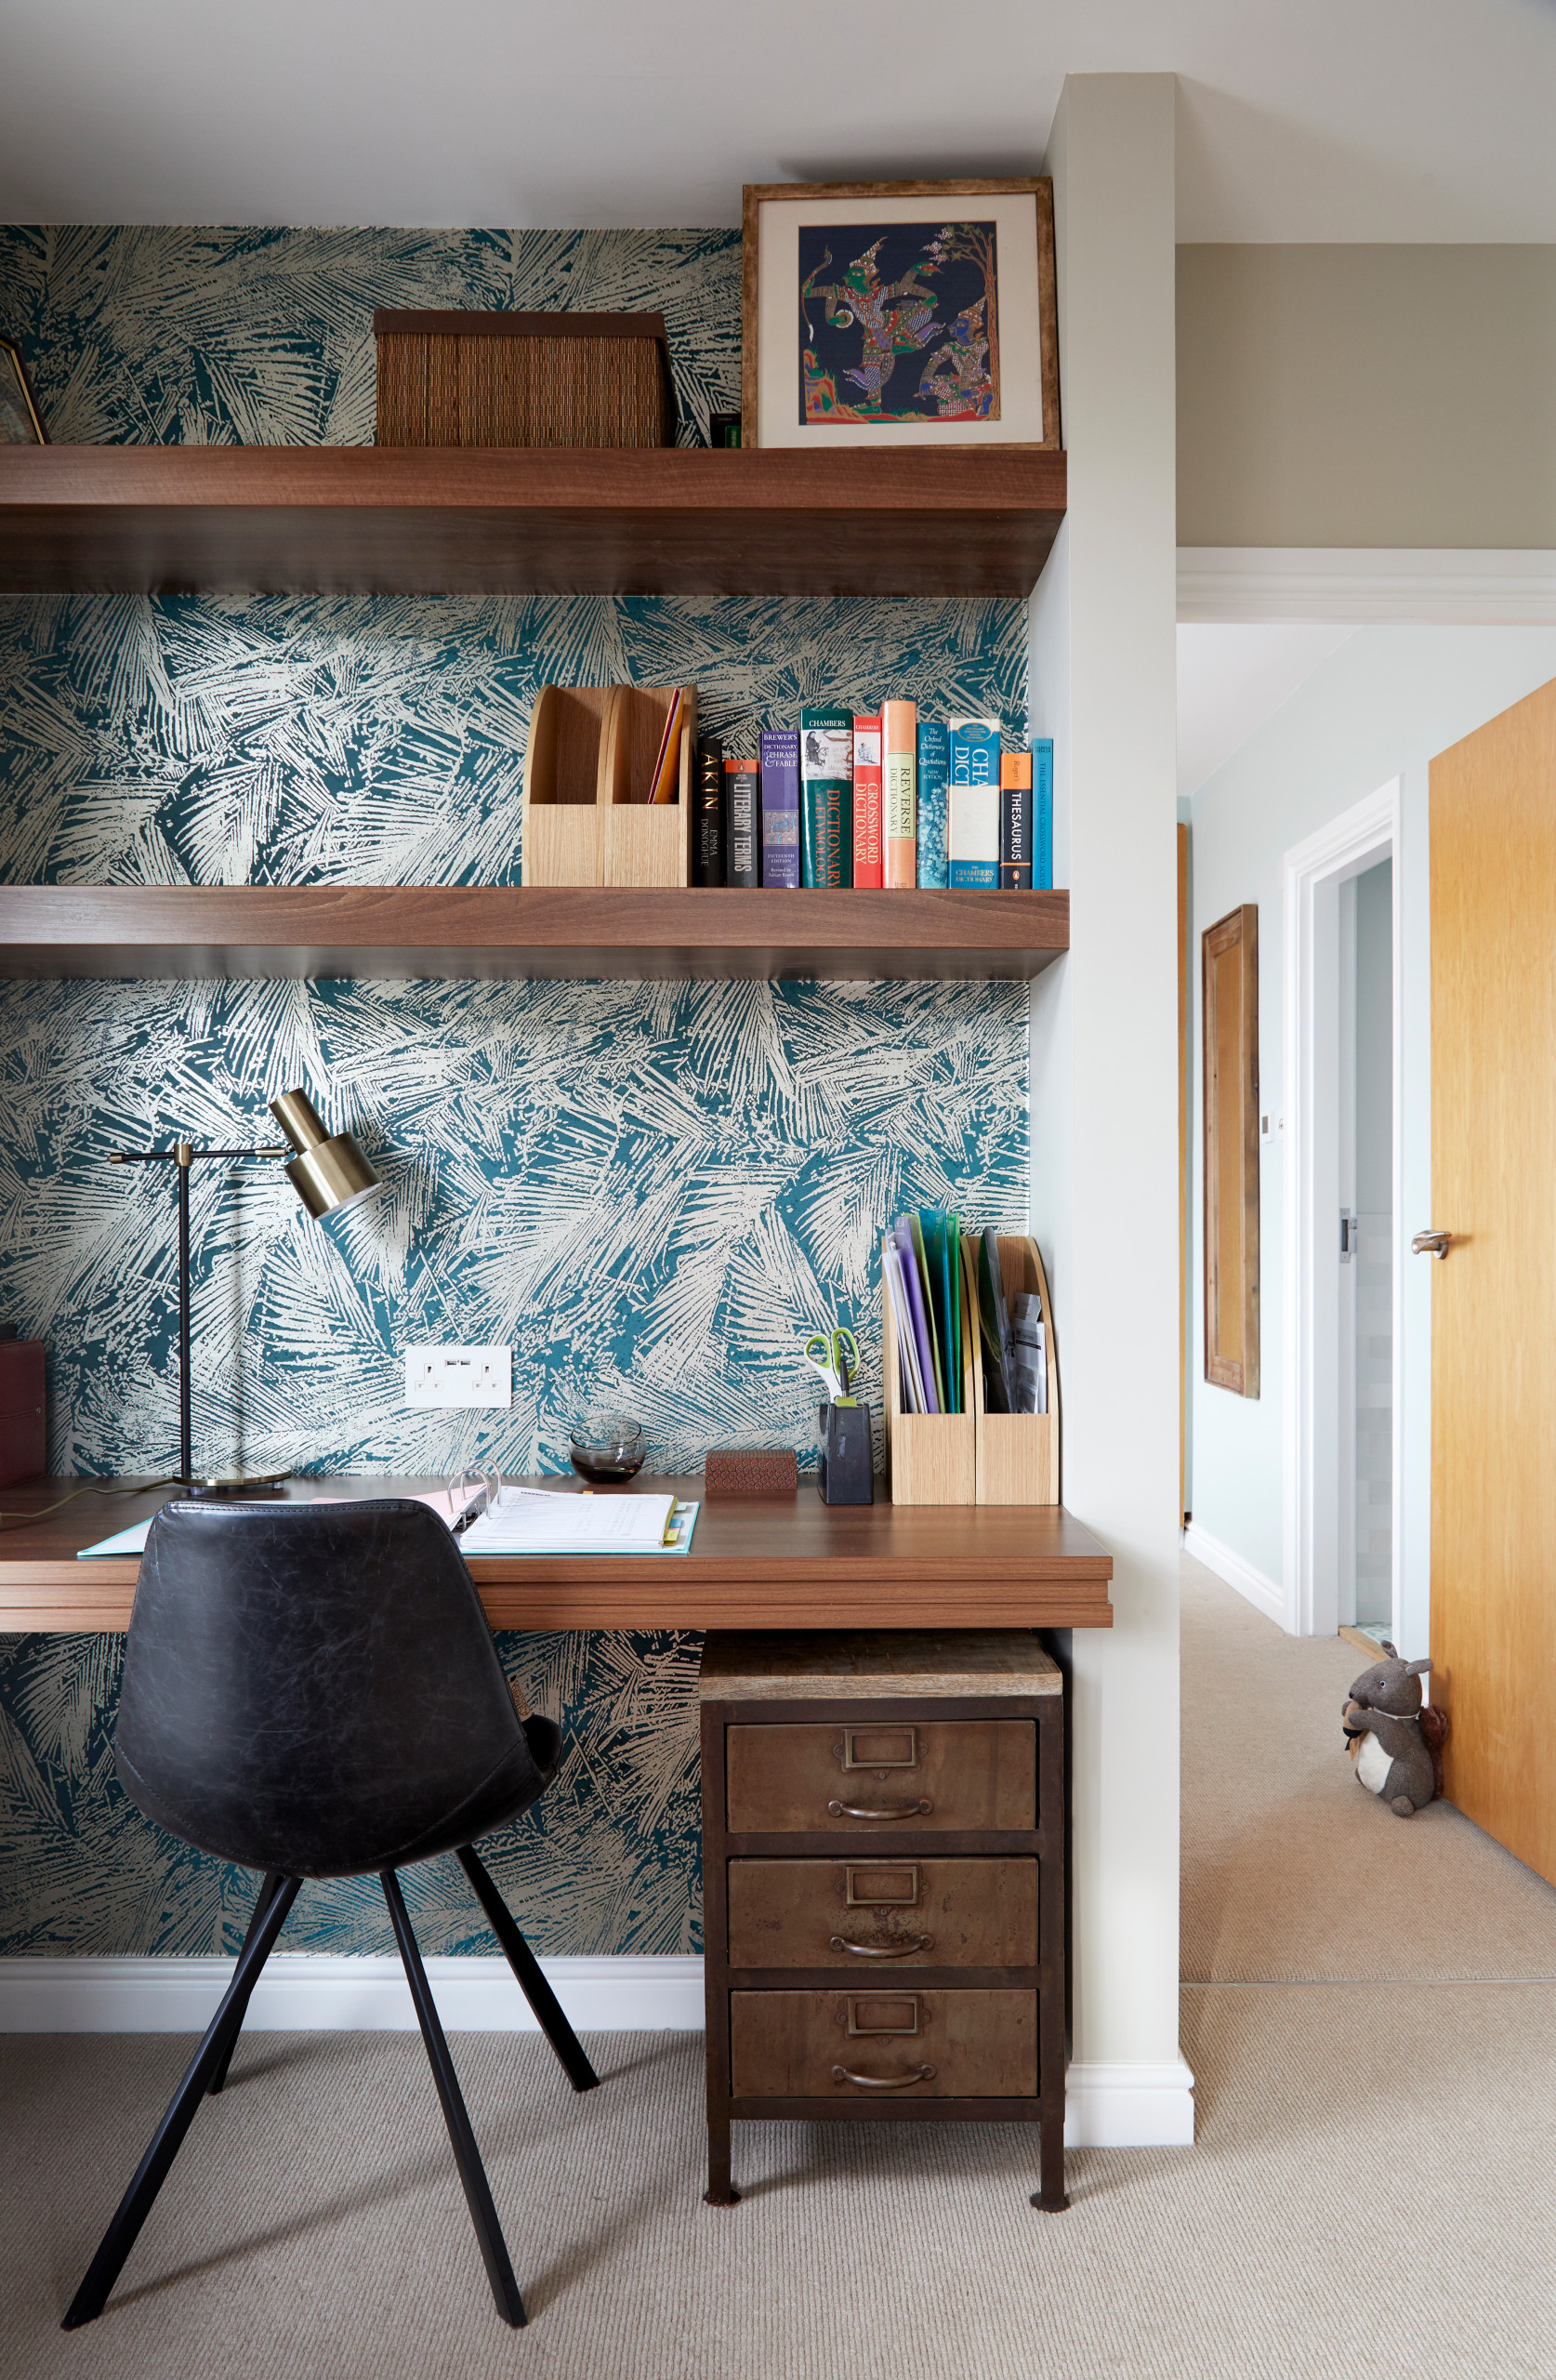 Wallpaper for study or home office - the right decision for